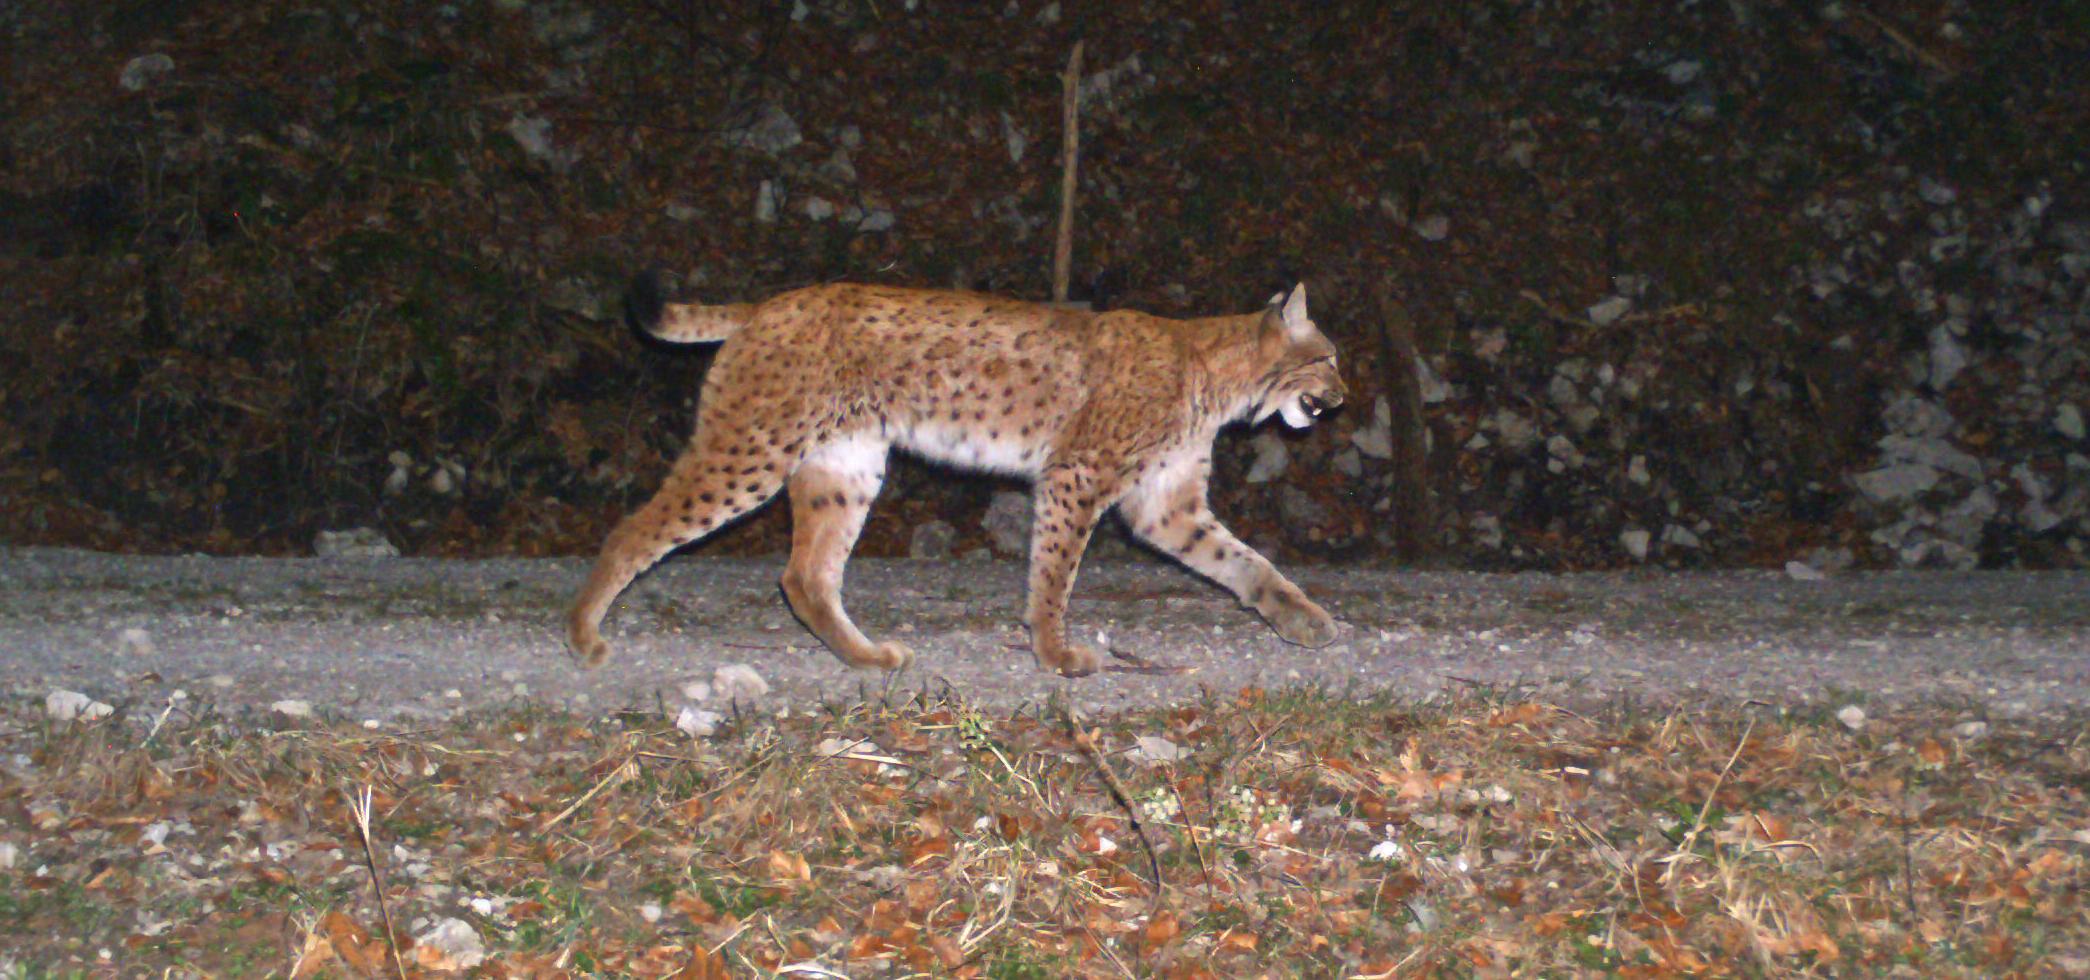 Night-time photo trap image shows lynx running on forest road